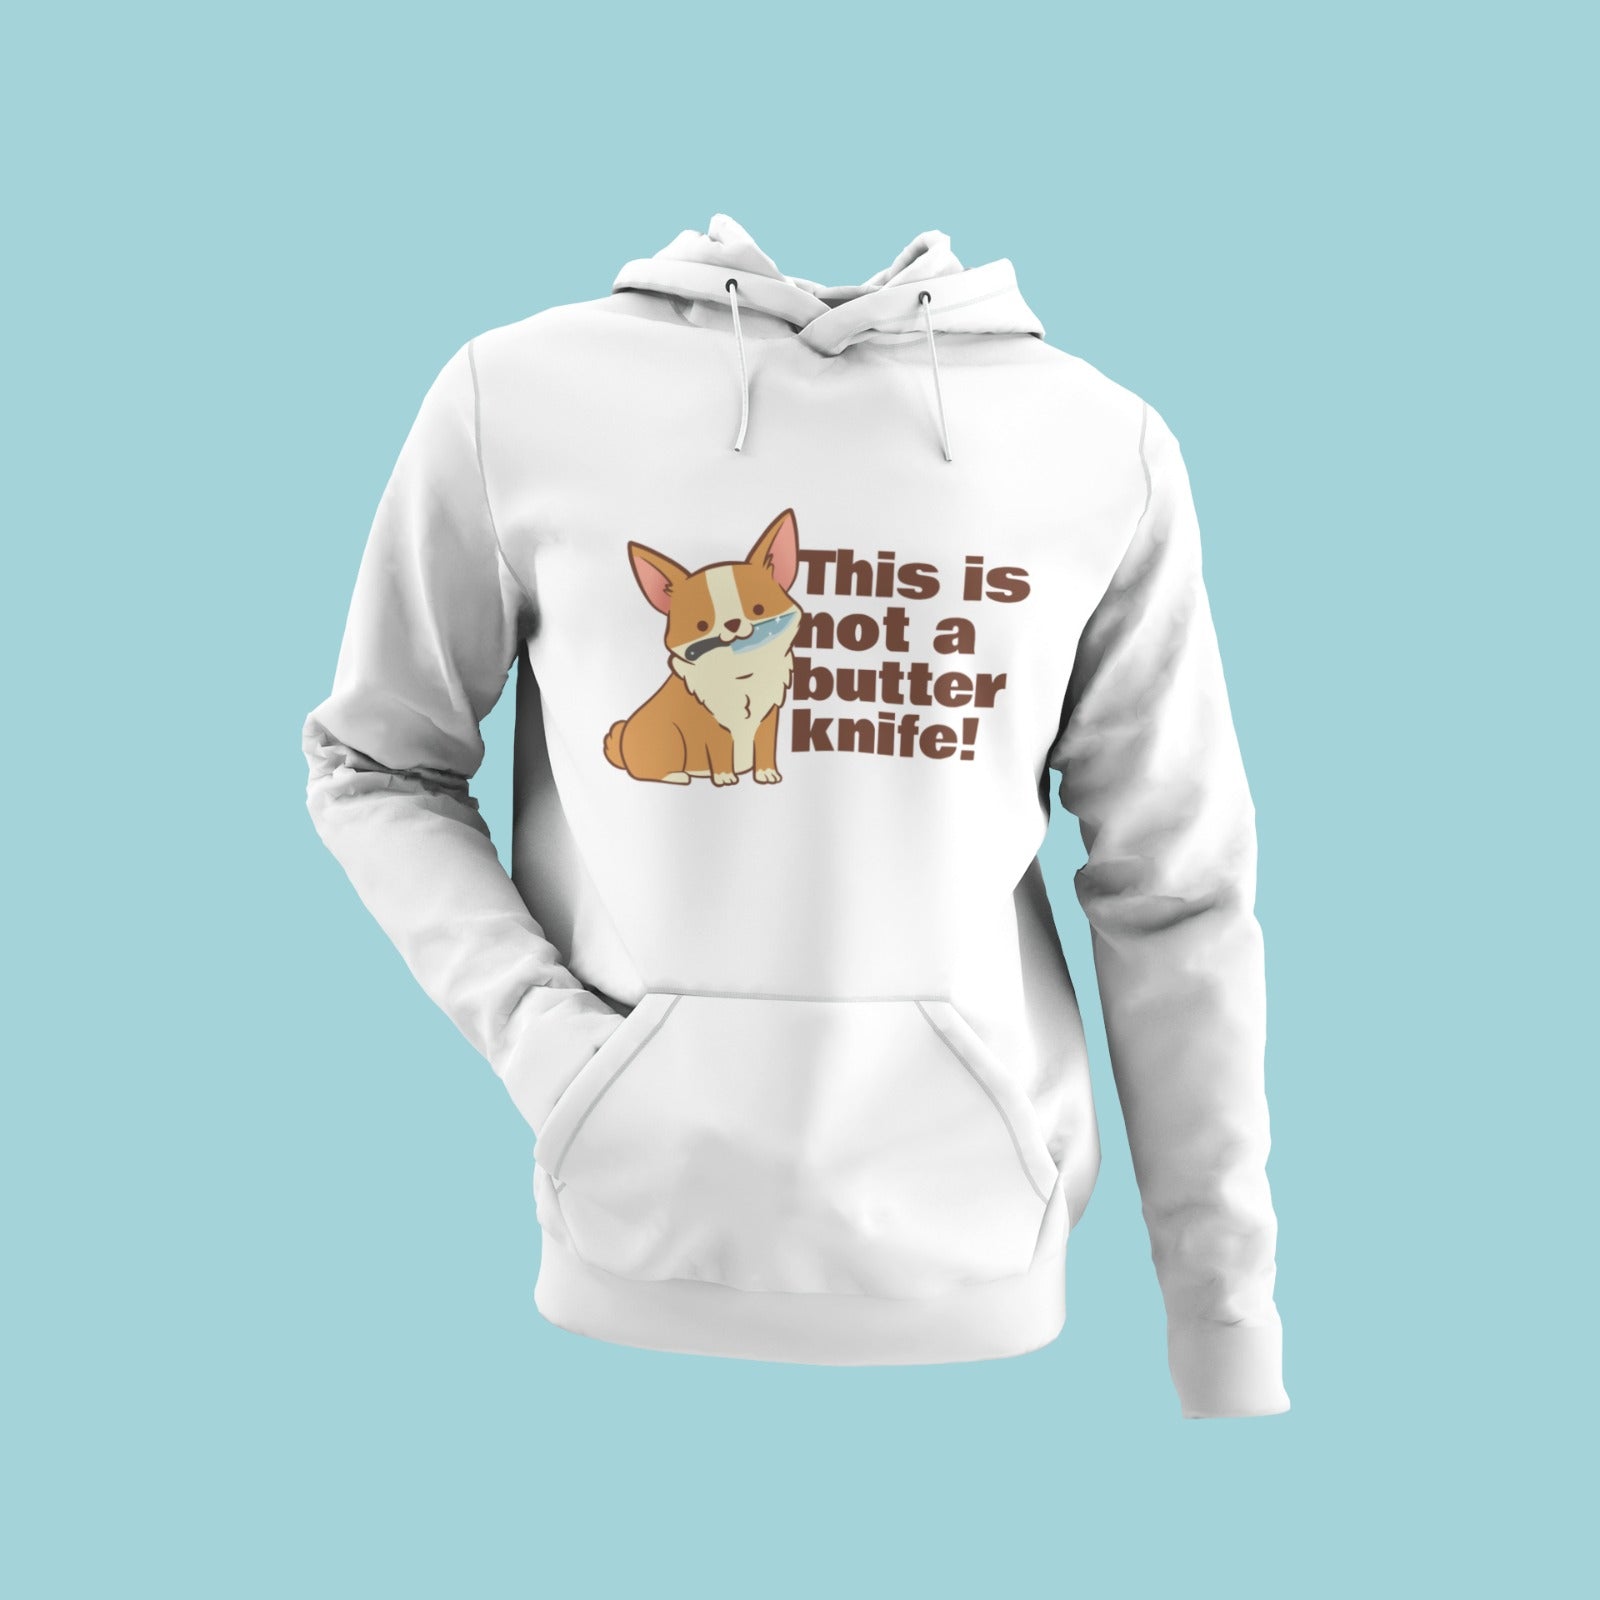 Make a statement with this white hoodie featuring a corgi holding a knife in its mouth and the message "this is not a butter knife!" Perfect for dog lovers who like to add some humor to their style. The eye-catching design is sure to turn heads and spark conversation. Order now and show off your love for corgis and your sense of humor!